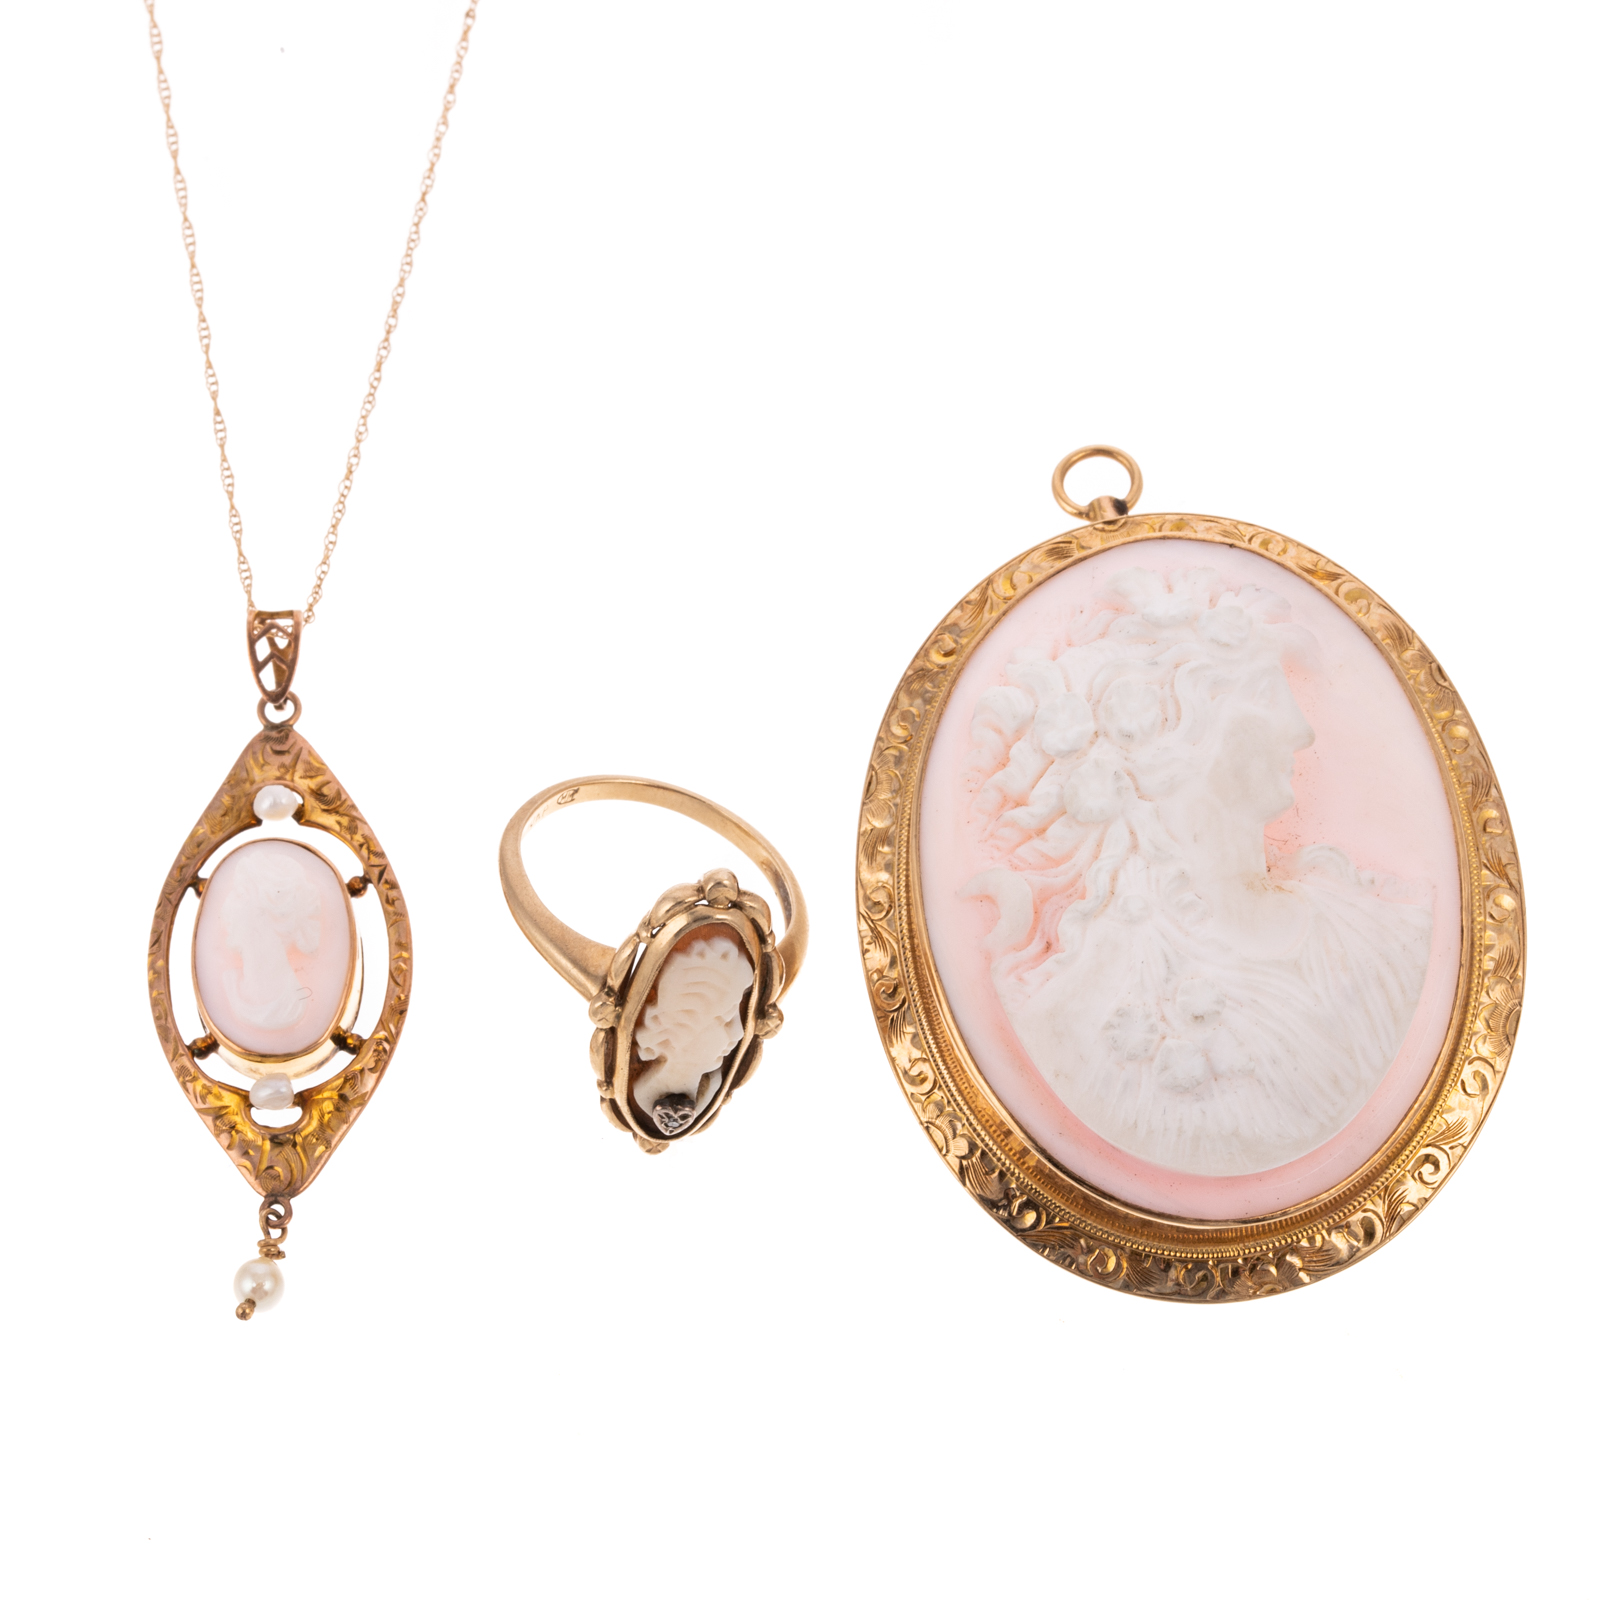 AN ASSORTMENT OF CAMEO JEWELRY